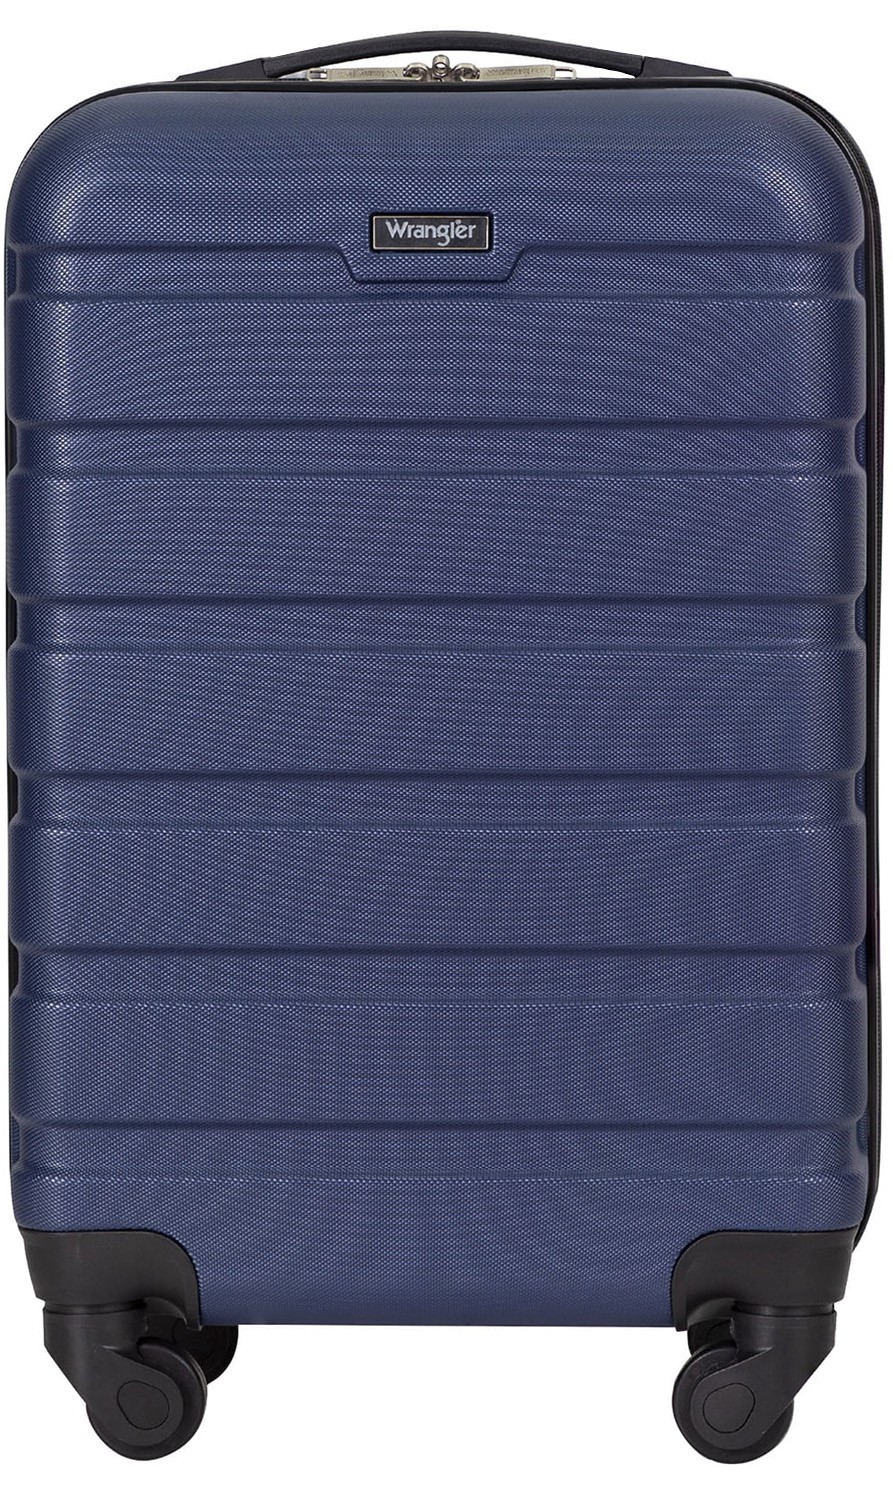 Wrangler 20” Carry-On Rolling Hard side Spinner Luggage - Navy - image 1 of 7